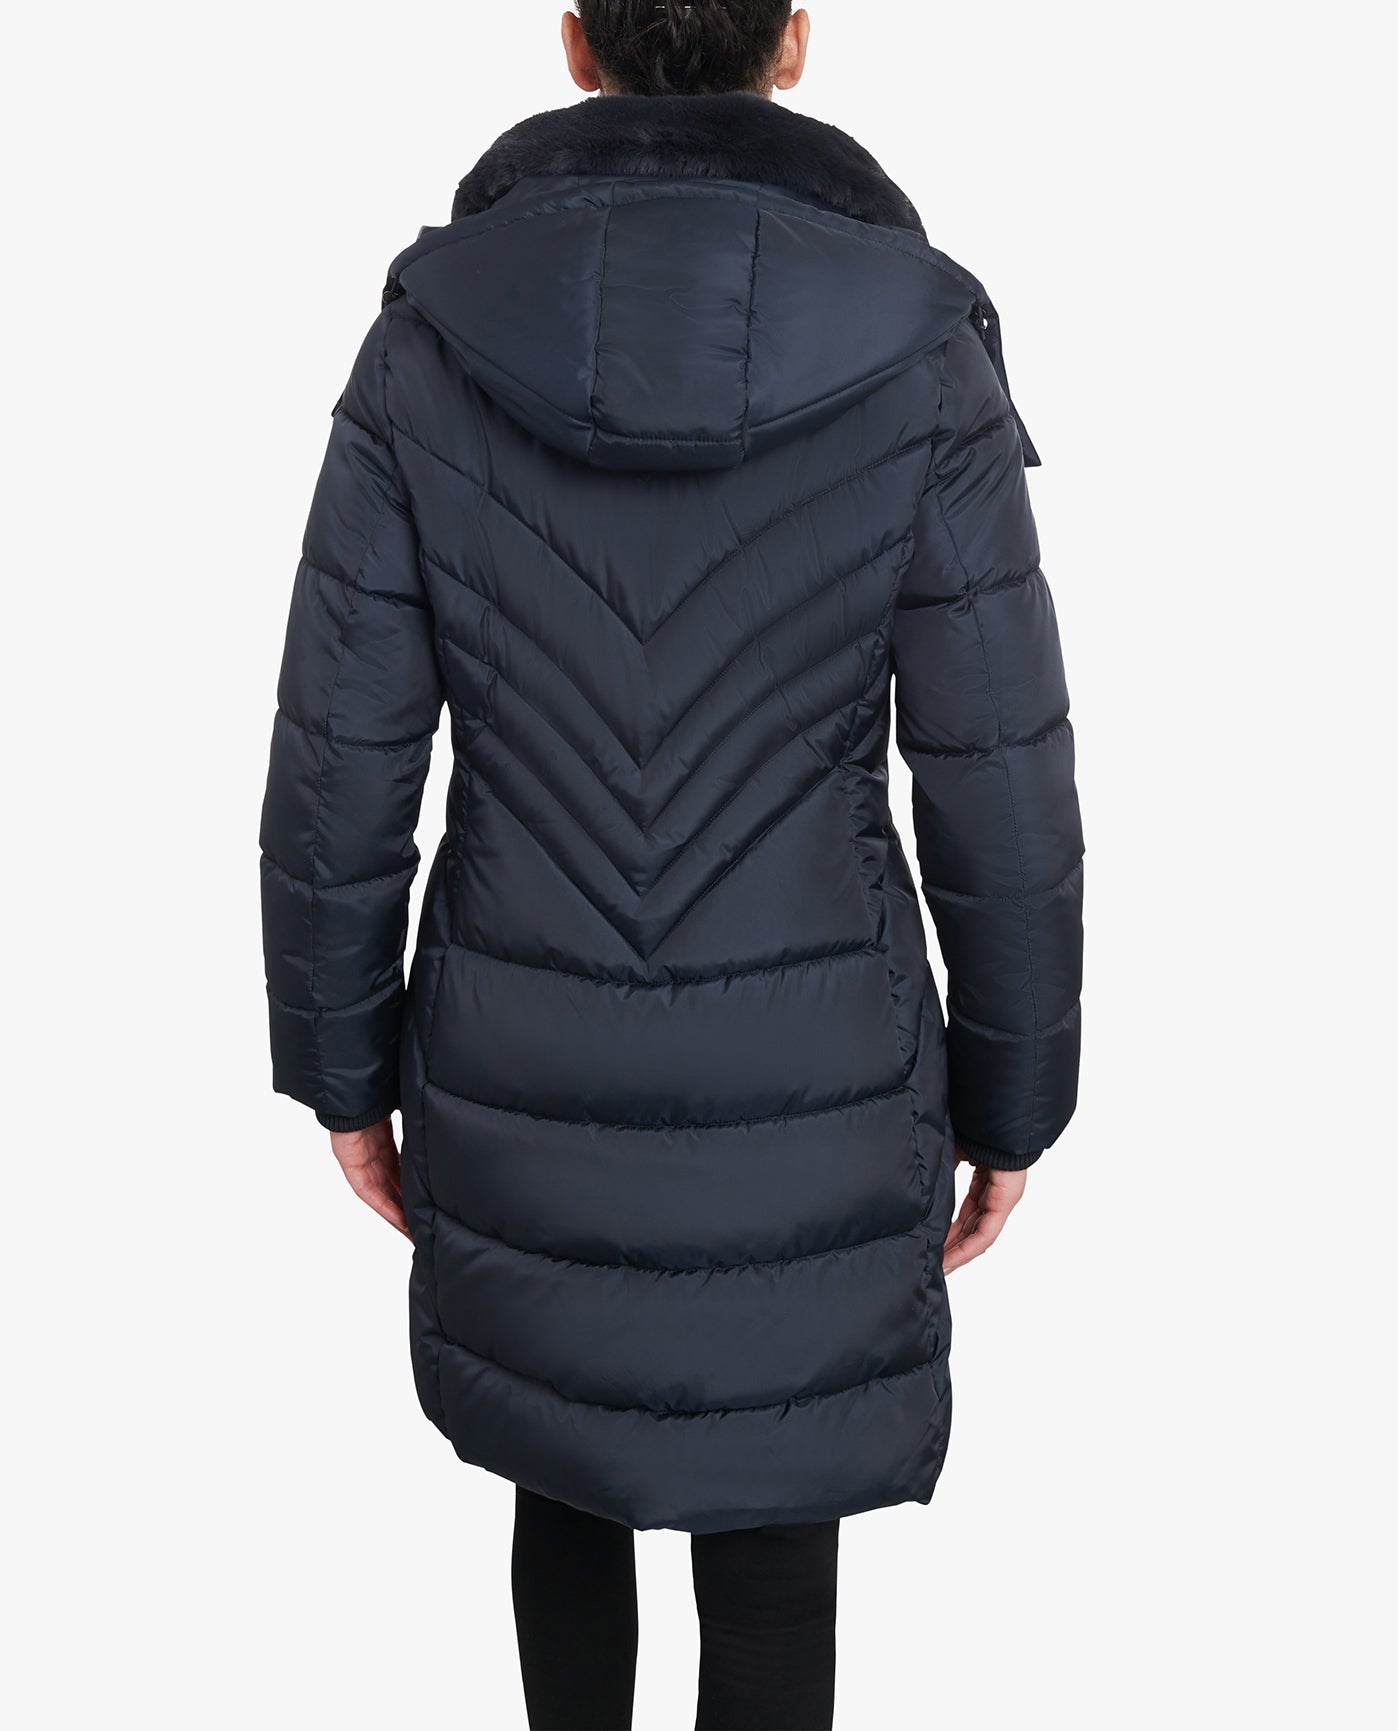 BACK VIEW OF ZIP-FRONT HOODED HEAVY WEIGHT PUFFER JACKET WITH BUTTON-OFF FUR COLLAR | NAVY